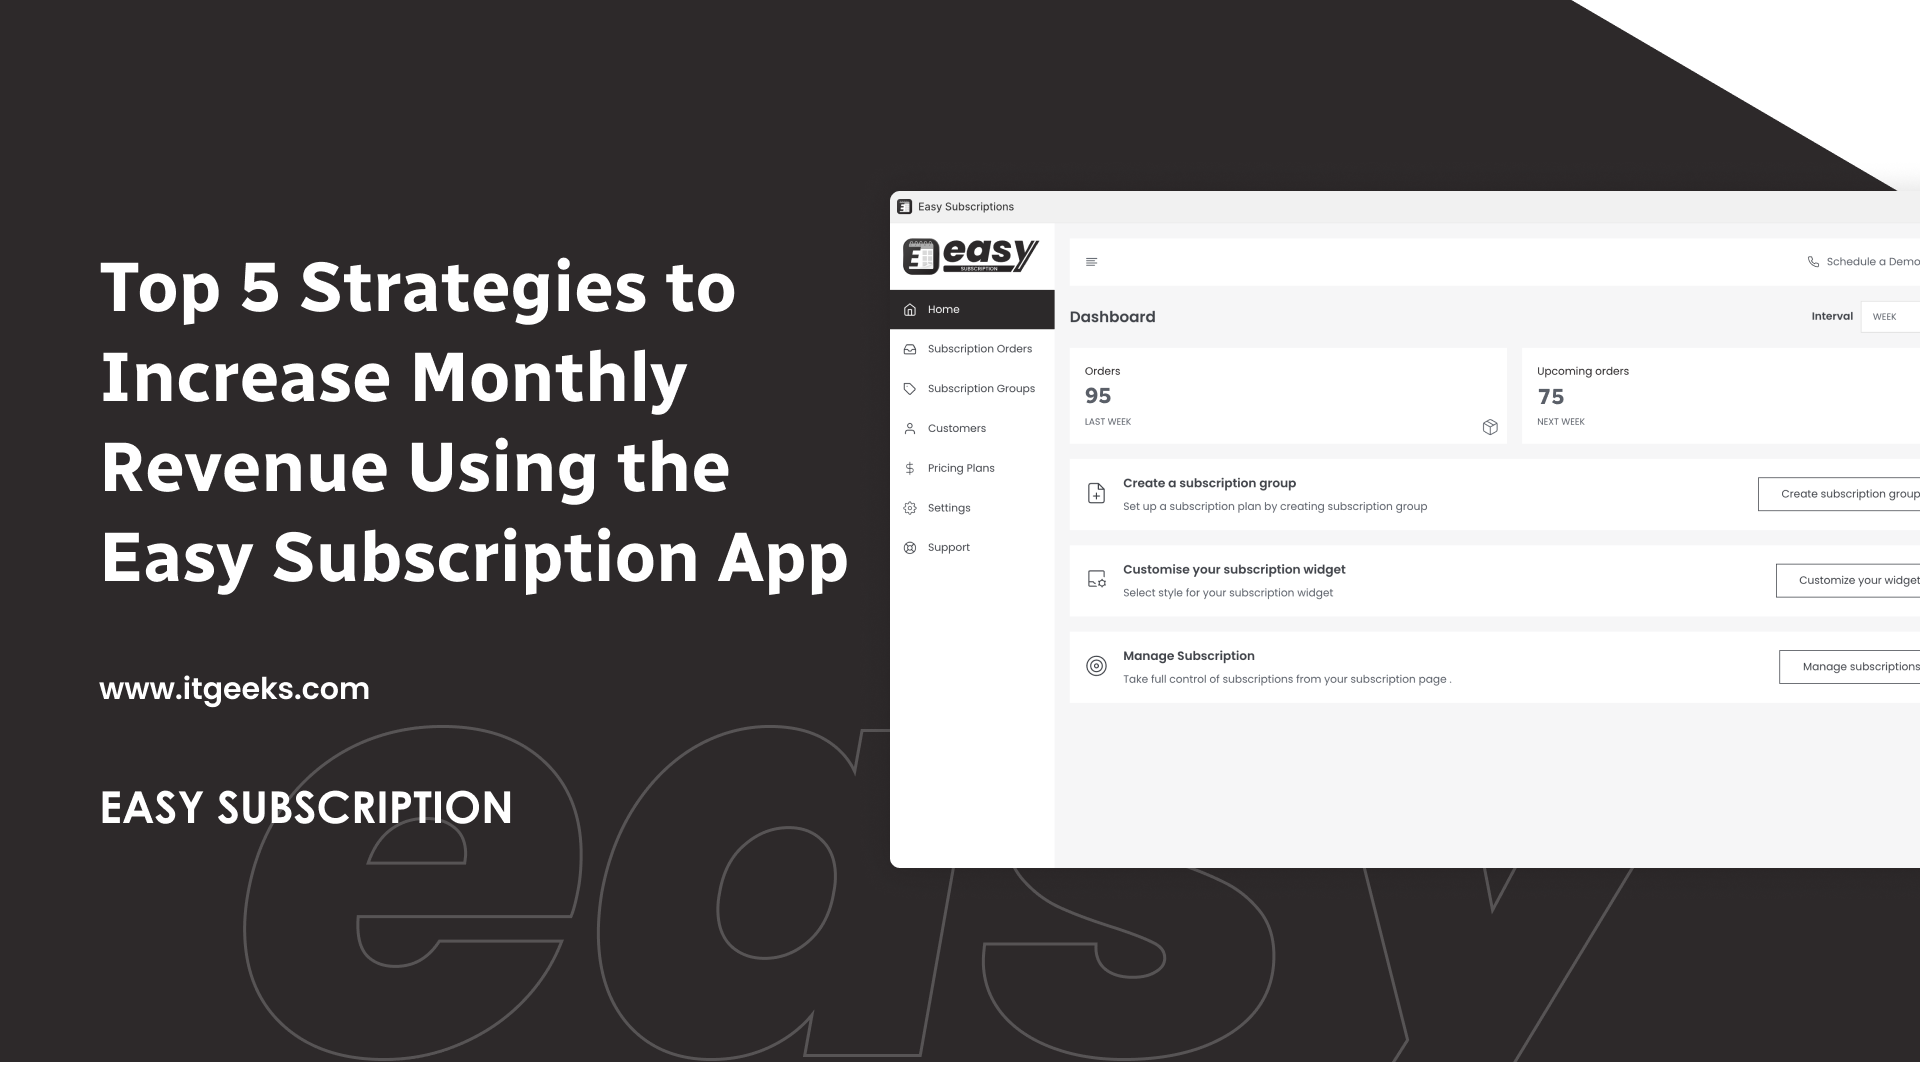 Top 5 Strategies to Increase Monthly Revenue Using the Easy Subscription App